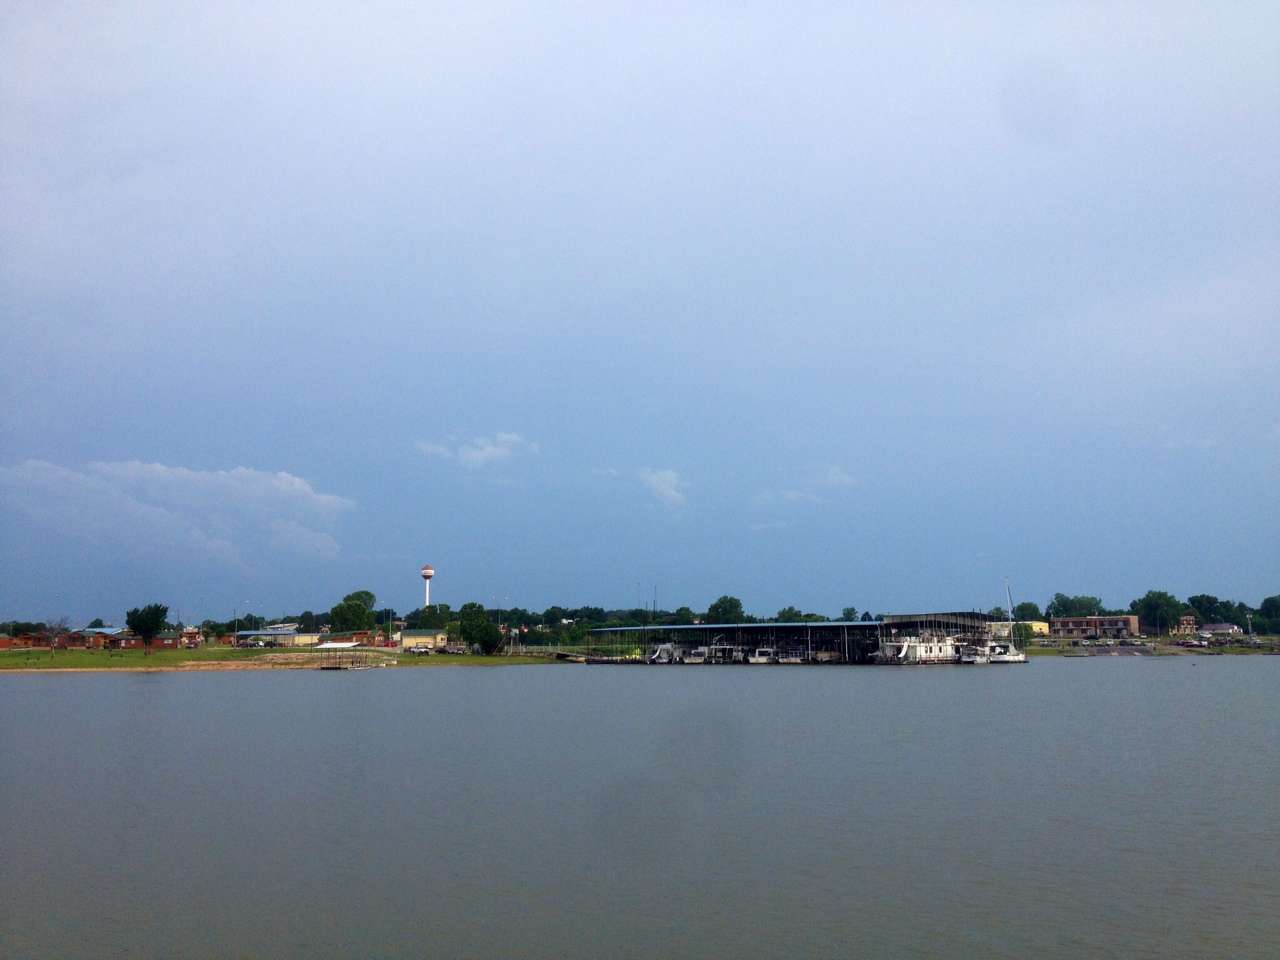 The skies over Lake Eufaula look peaceful now but a major storm system is forecasted to be moving in soon.The host team Oklahoma are wishing all the anglers stay safe today.
